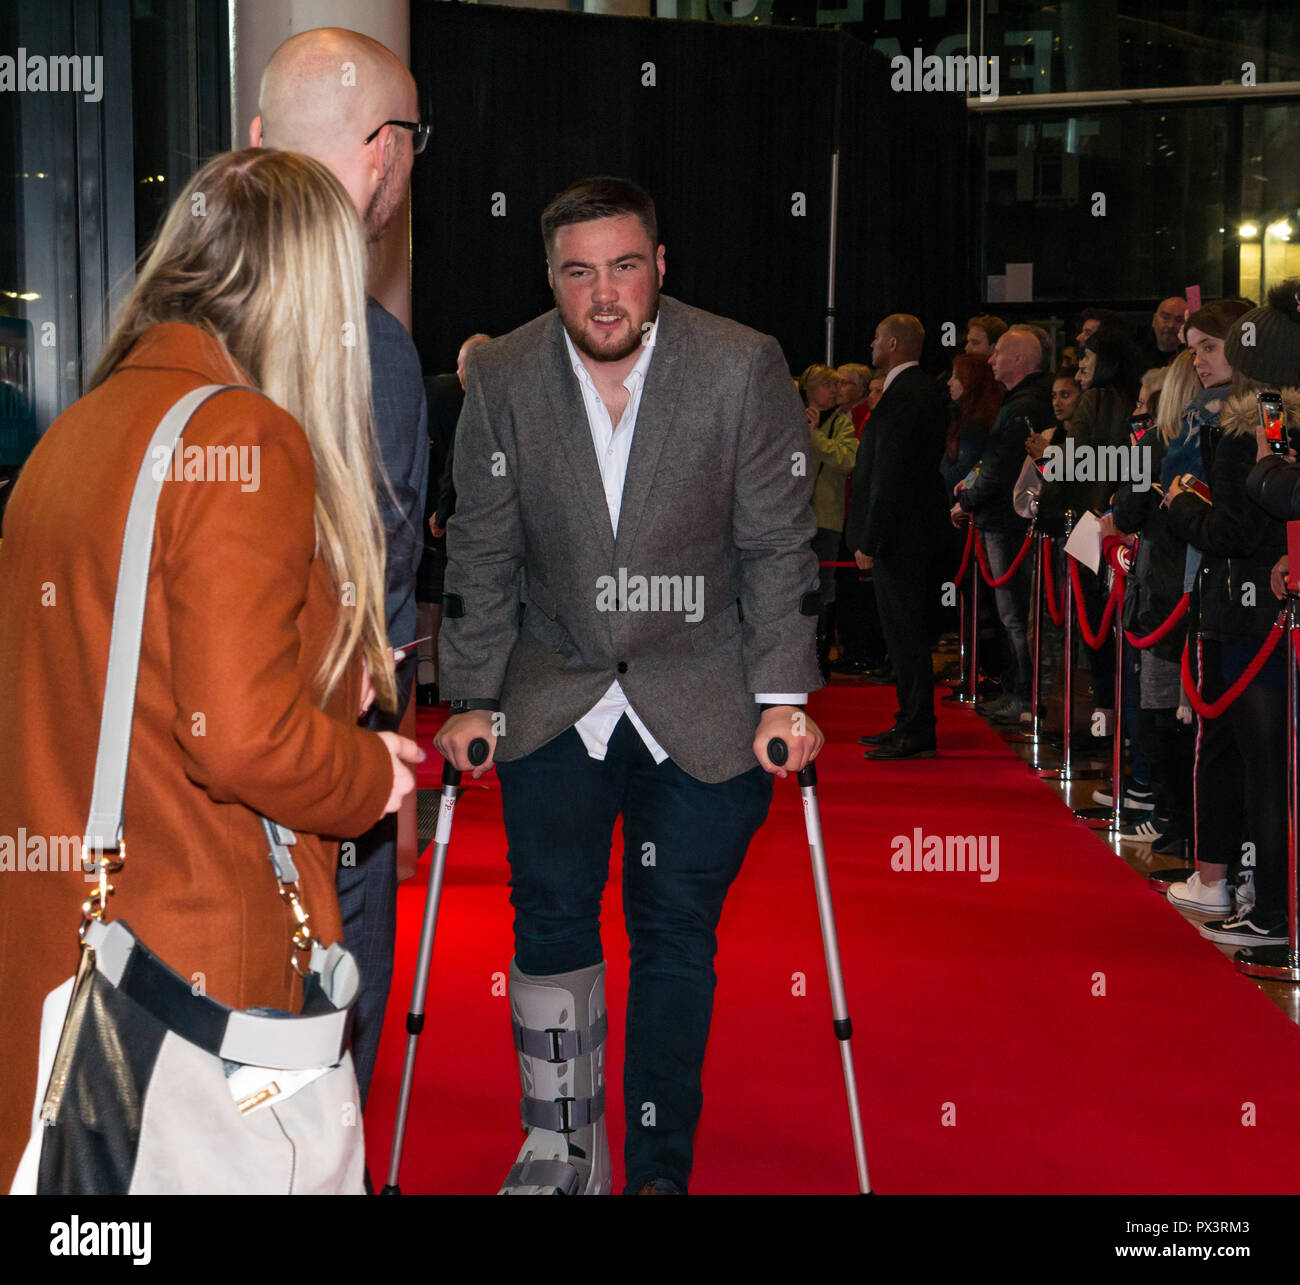 Vue Omni, Leith Walk, Edinburgh, Scotland, United Kingdom, 19th October 2018. Stars attend the Scottish premiere of Netflix Outlaw King. The red carpet is out for the Netflix blockbuster film. Zander Fagerson, Glasgow Warriors and Scottish Rugby Player arrives with a leg injury and his leg in a cast Stock Photo